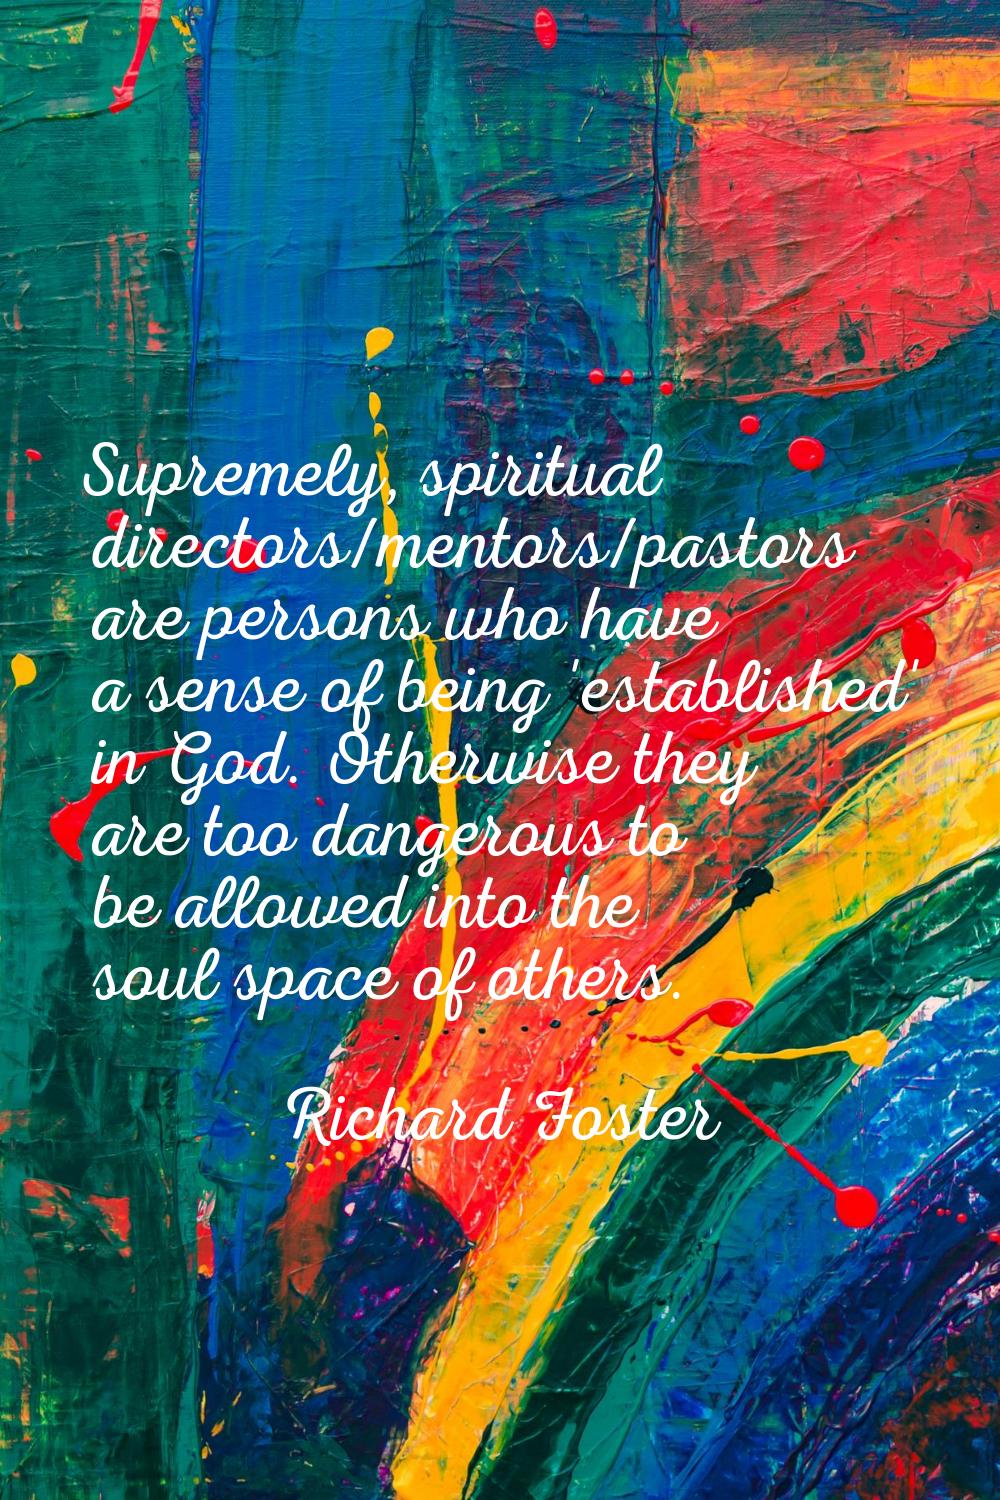 Supremely, spiritual directors/mentors/pastors are persons who have a sense of being 'established' 